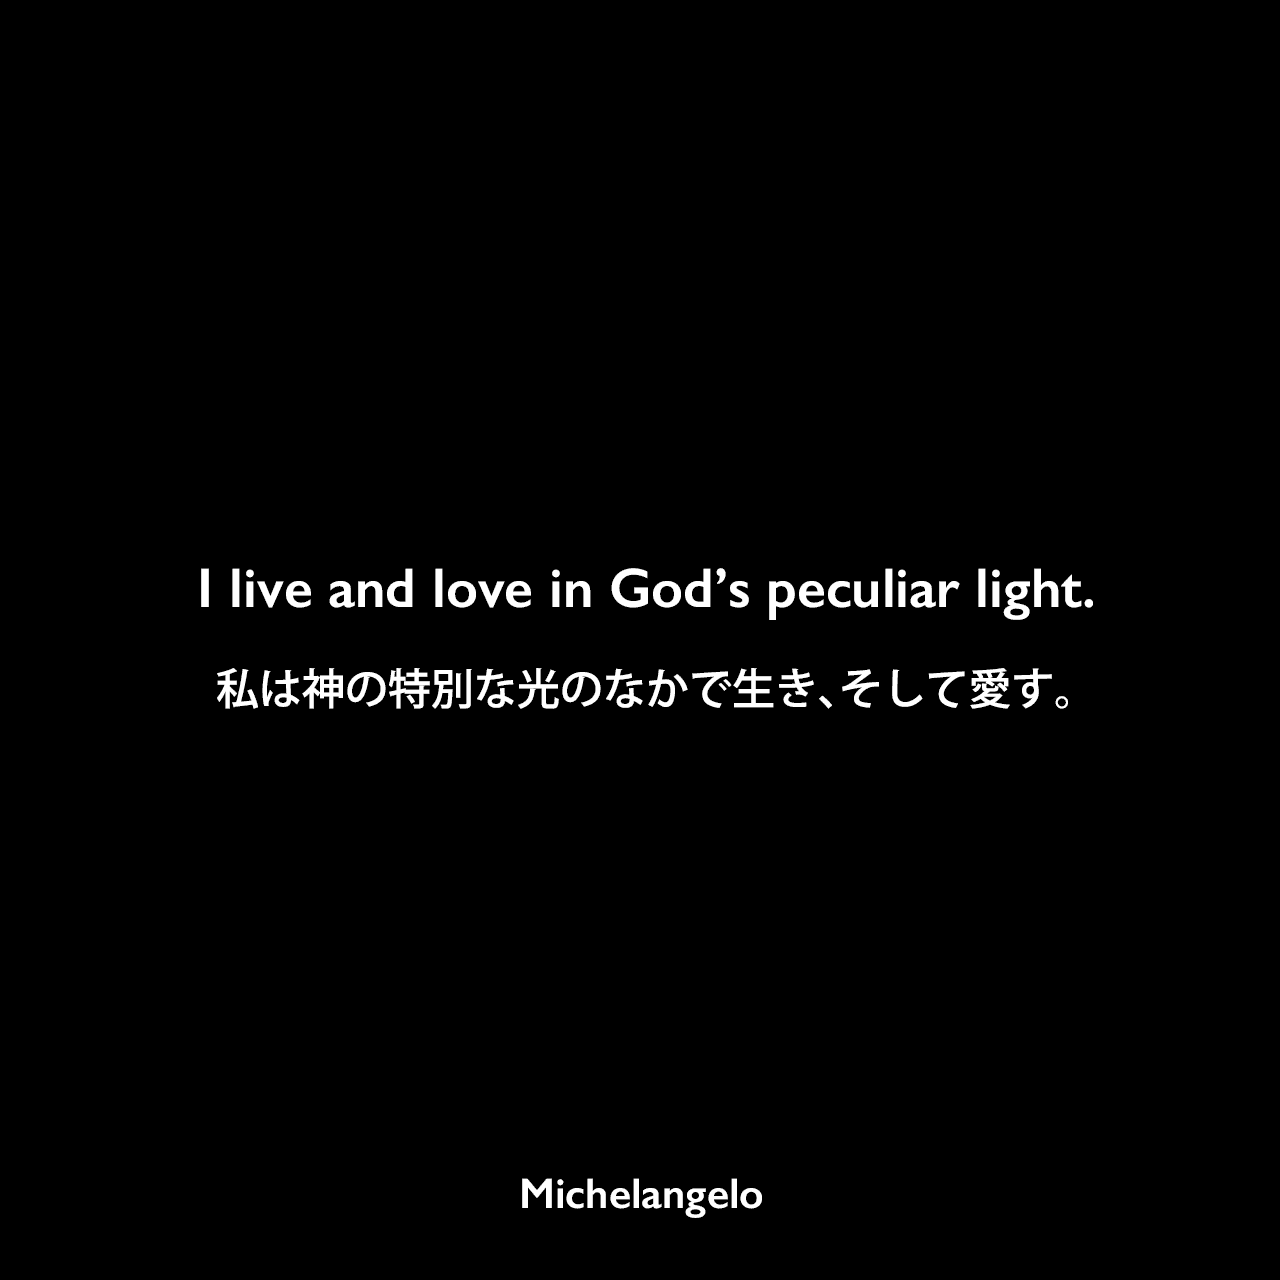 I live and love in God’s peculiar light.私は神の特別な光のなかで生き、そして愛す。Michelangelo